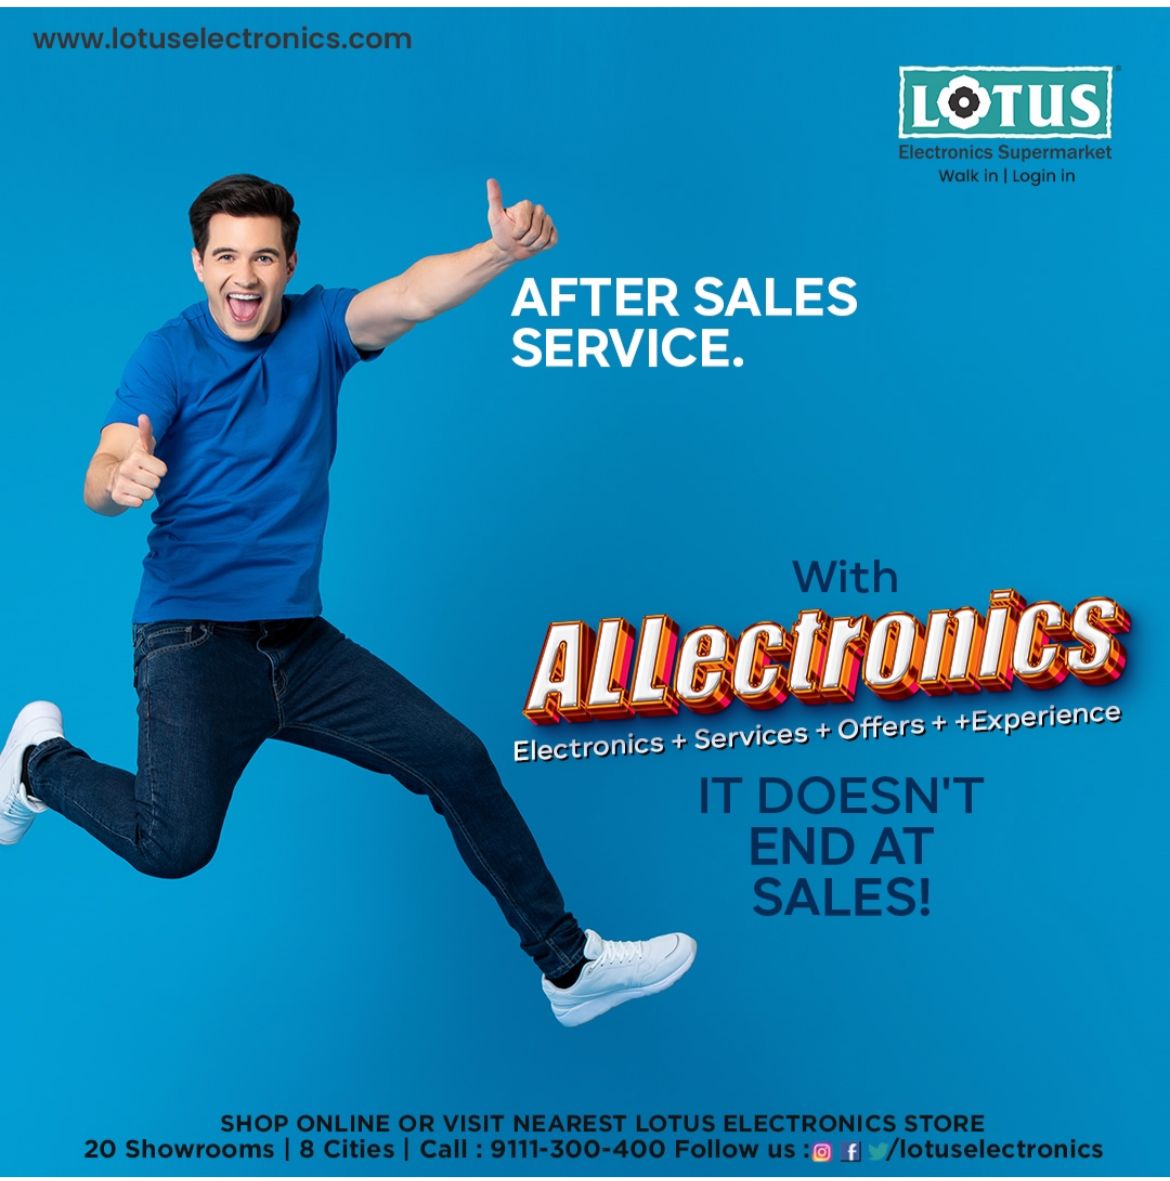 Lotus Electronics anticipates, and how is the company planning to address them